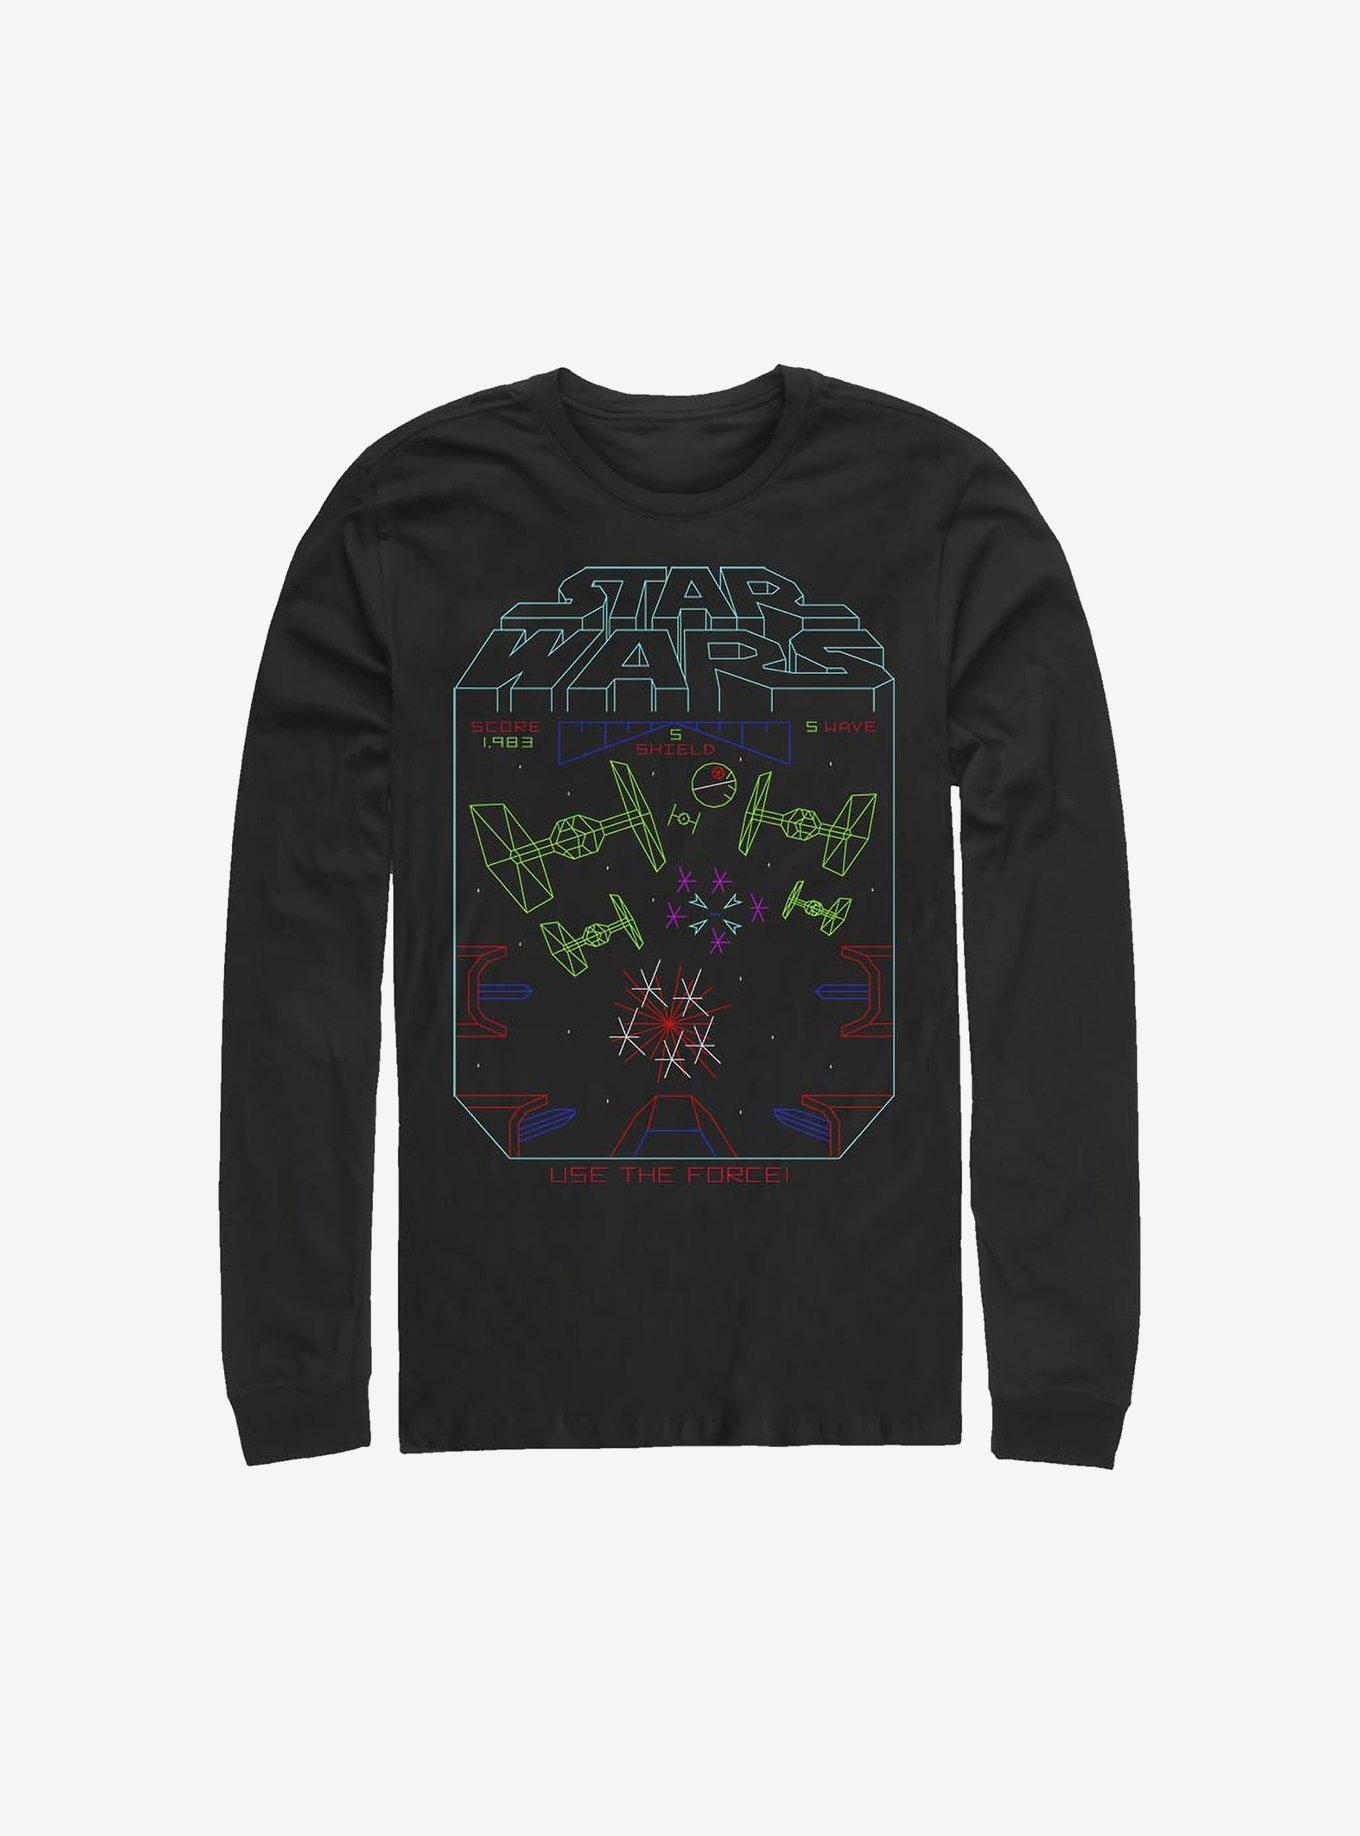 Star Wars 5 Standing By Long-Sleeve T-Shirt